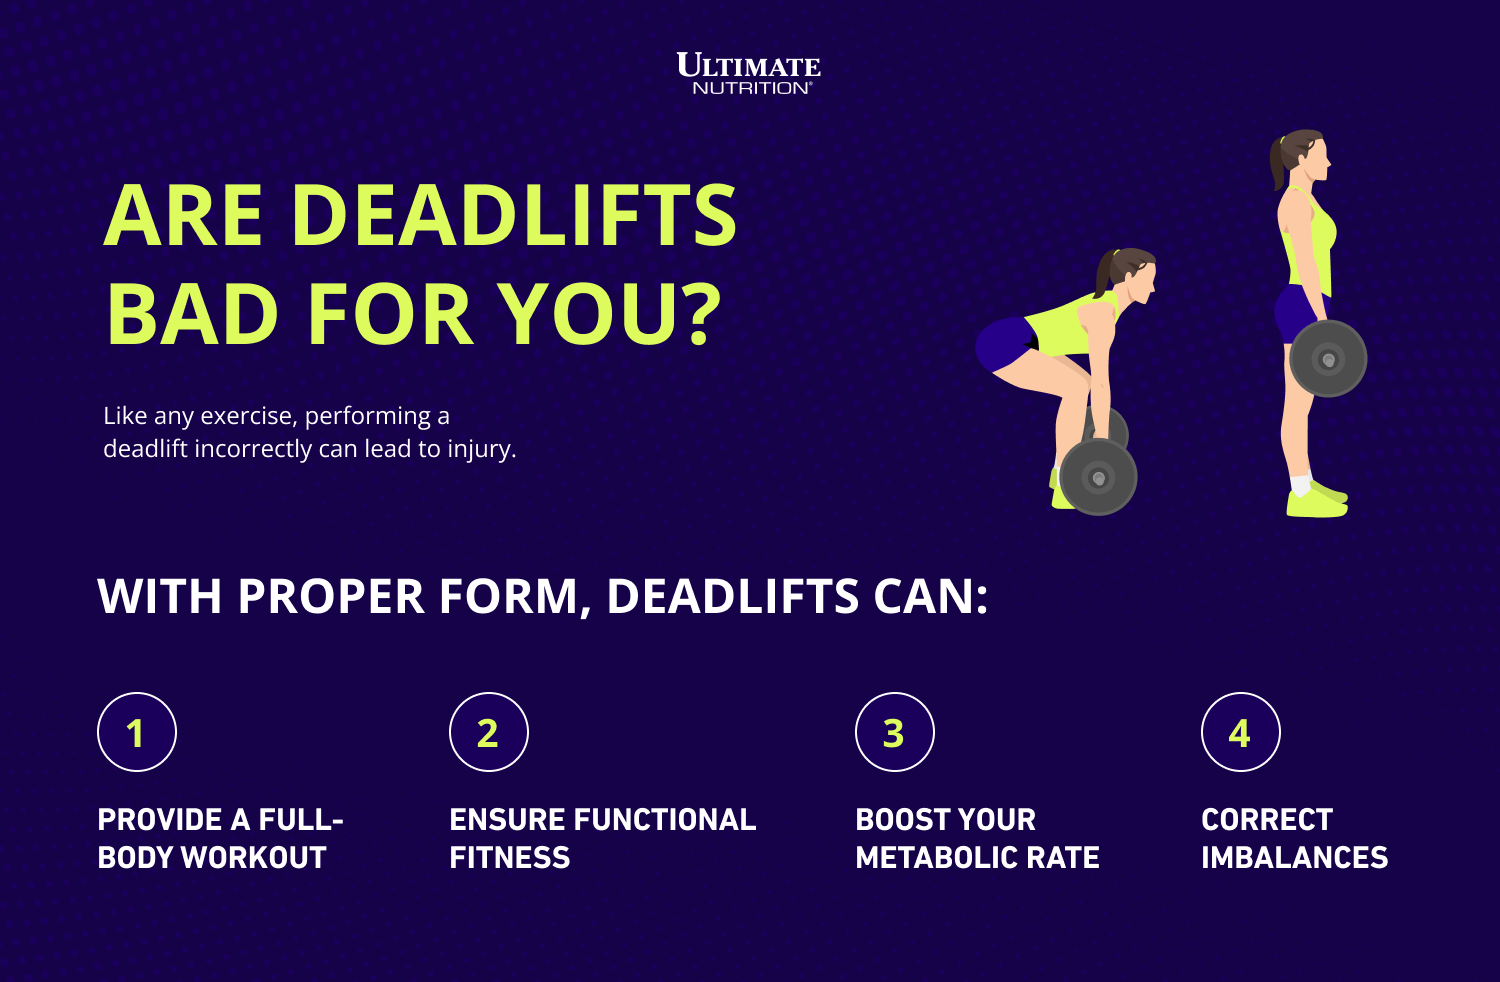 Are Deadlifts Bad For You? Infographic | Ultimate Nutrition